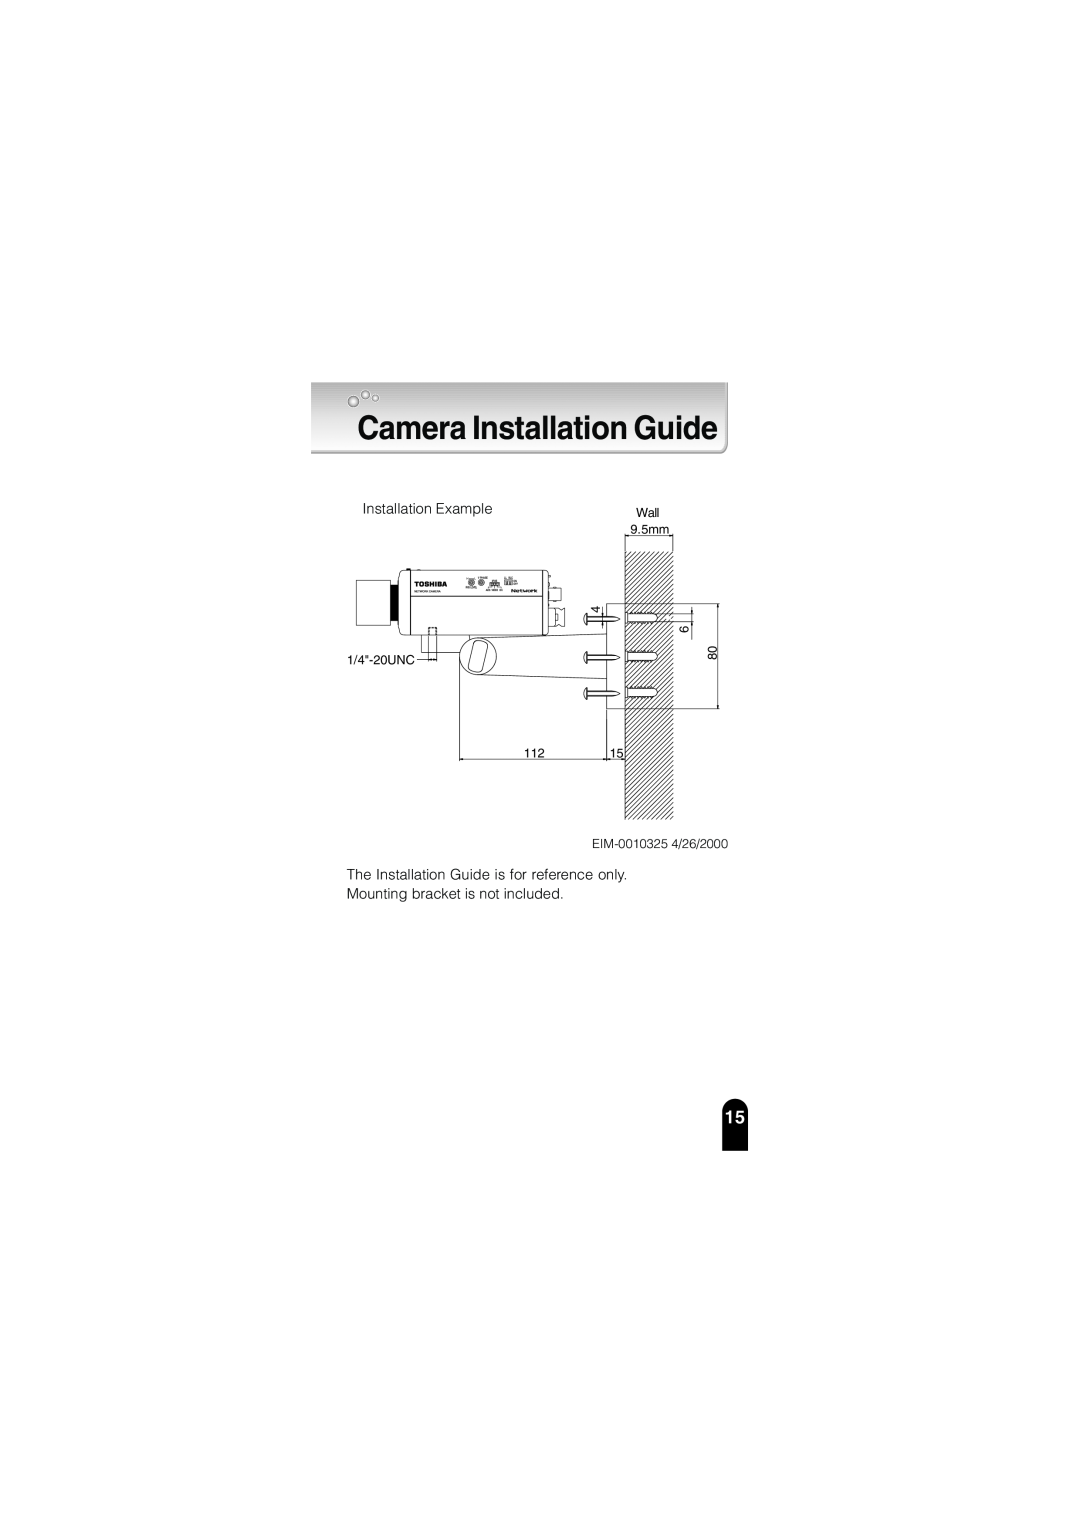 Toshiba IK-WB02A manual Camera Installation Guide, Installation Example, The Installation Guide is for reference only 